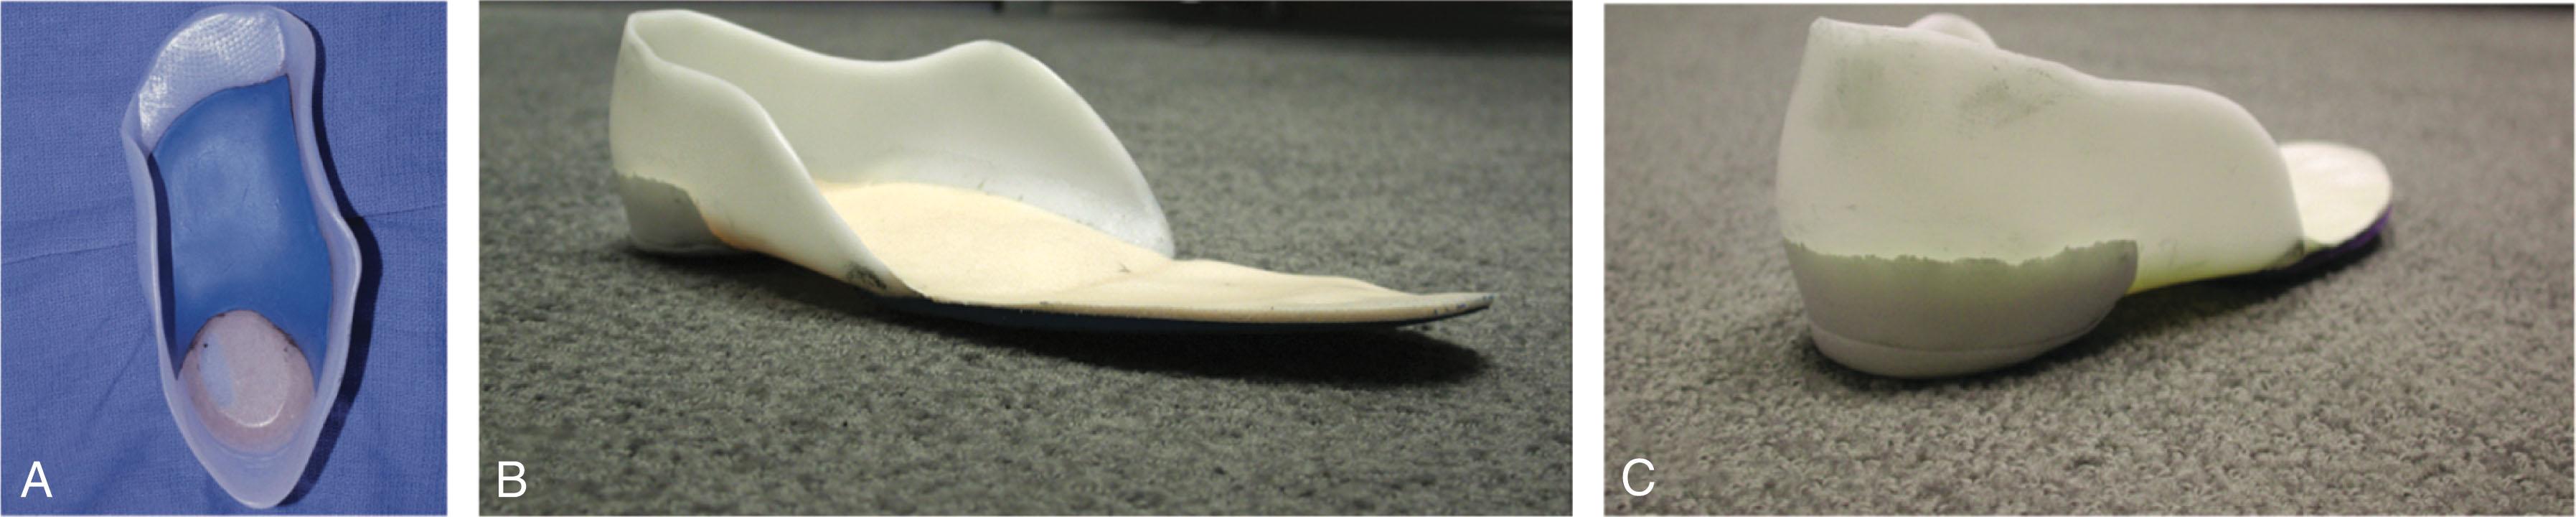 Fig. 29-17, A , University of California Biomechanics Laboratory (UCBL) orthosis. This orthosis functions by stabilizing the heel in neutral and by building up the lateral wall of the device to prevent abduction of the forefoot, thereby helping to reestablish a longitudinal arch in the flexible foot. B , Note higher heel counter allowing better control of heel valgus. C , Note posting of posterior orthosis to assist with hindfoot correction.